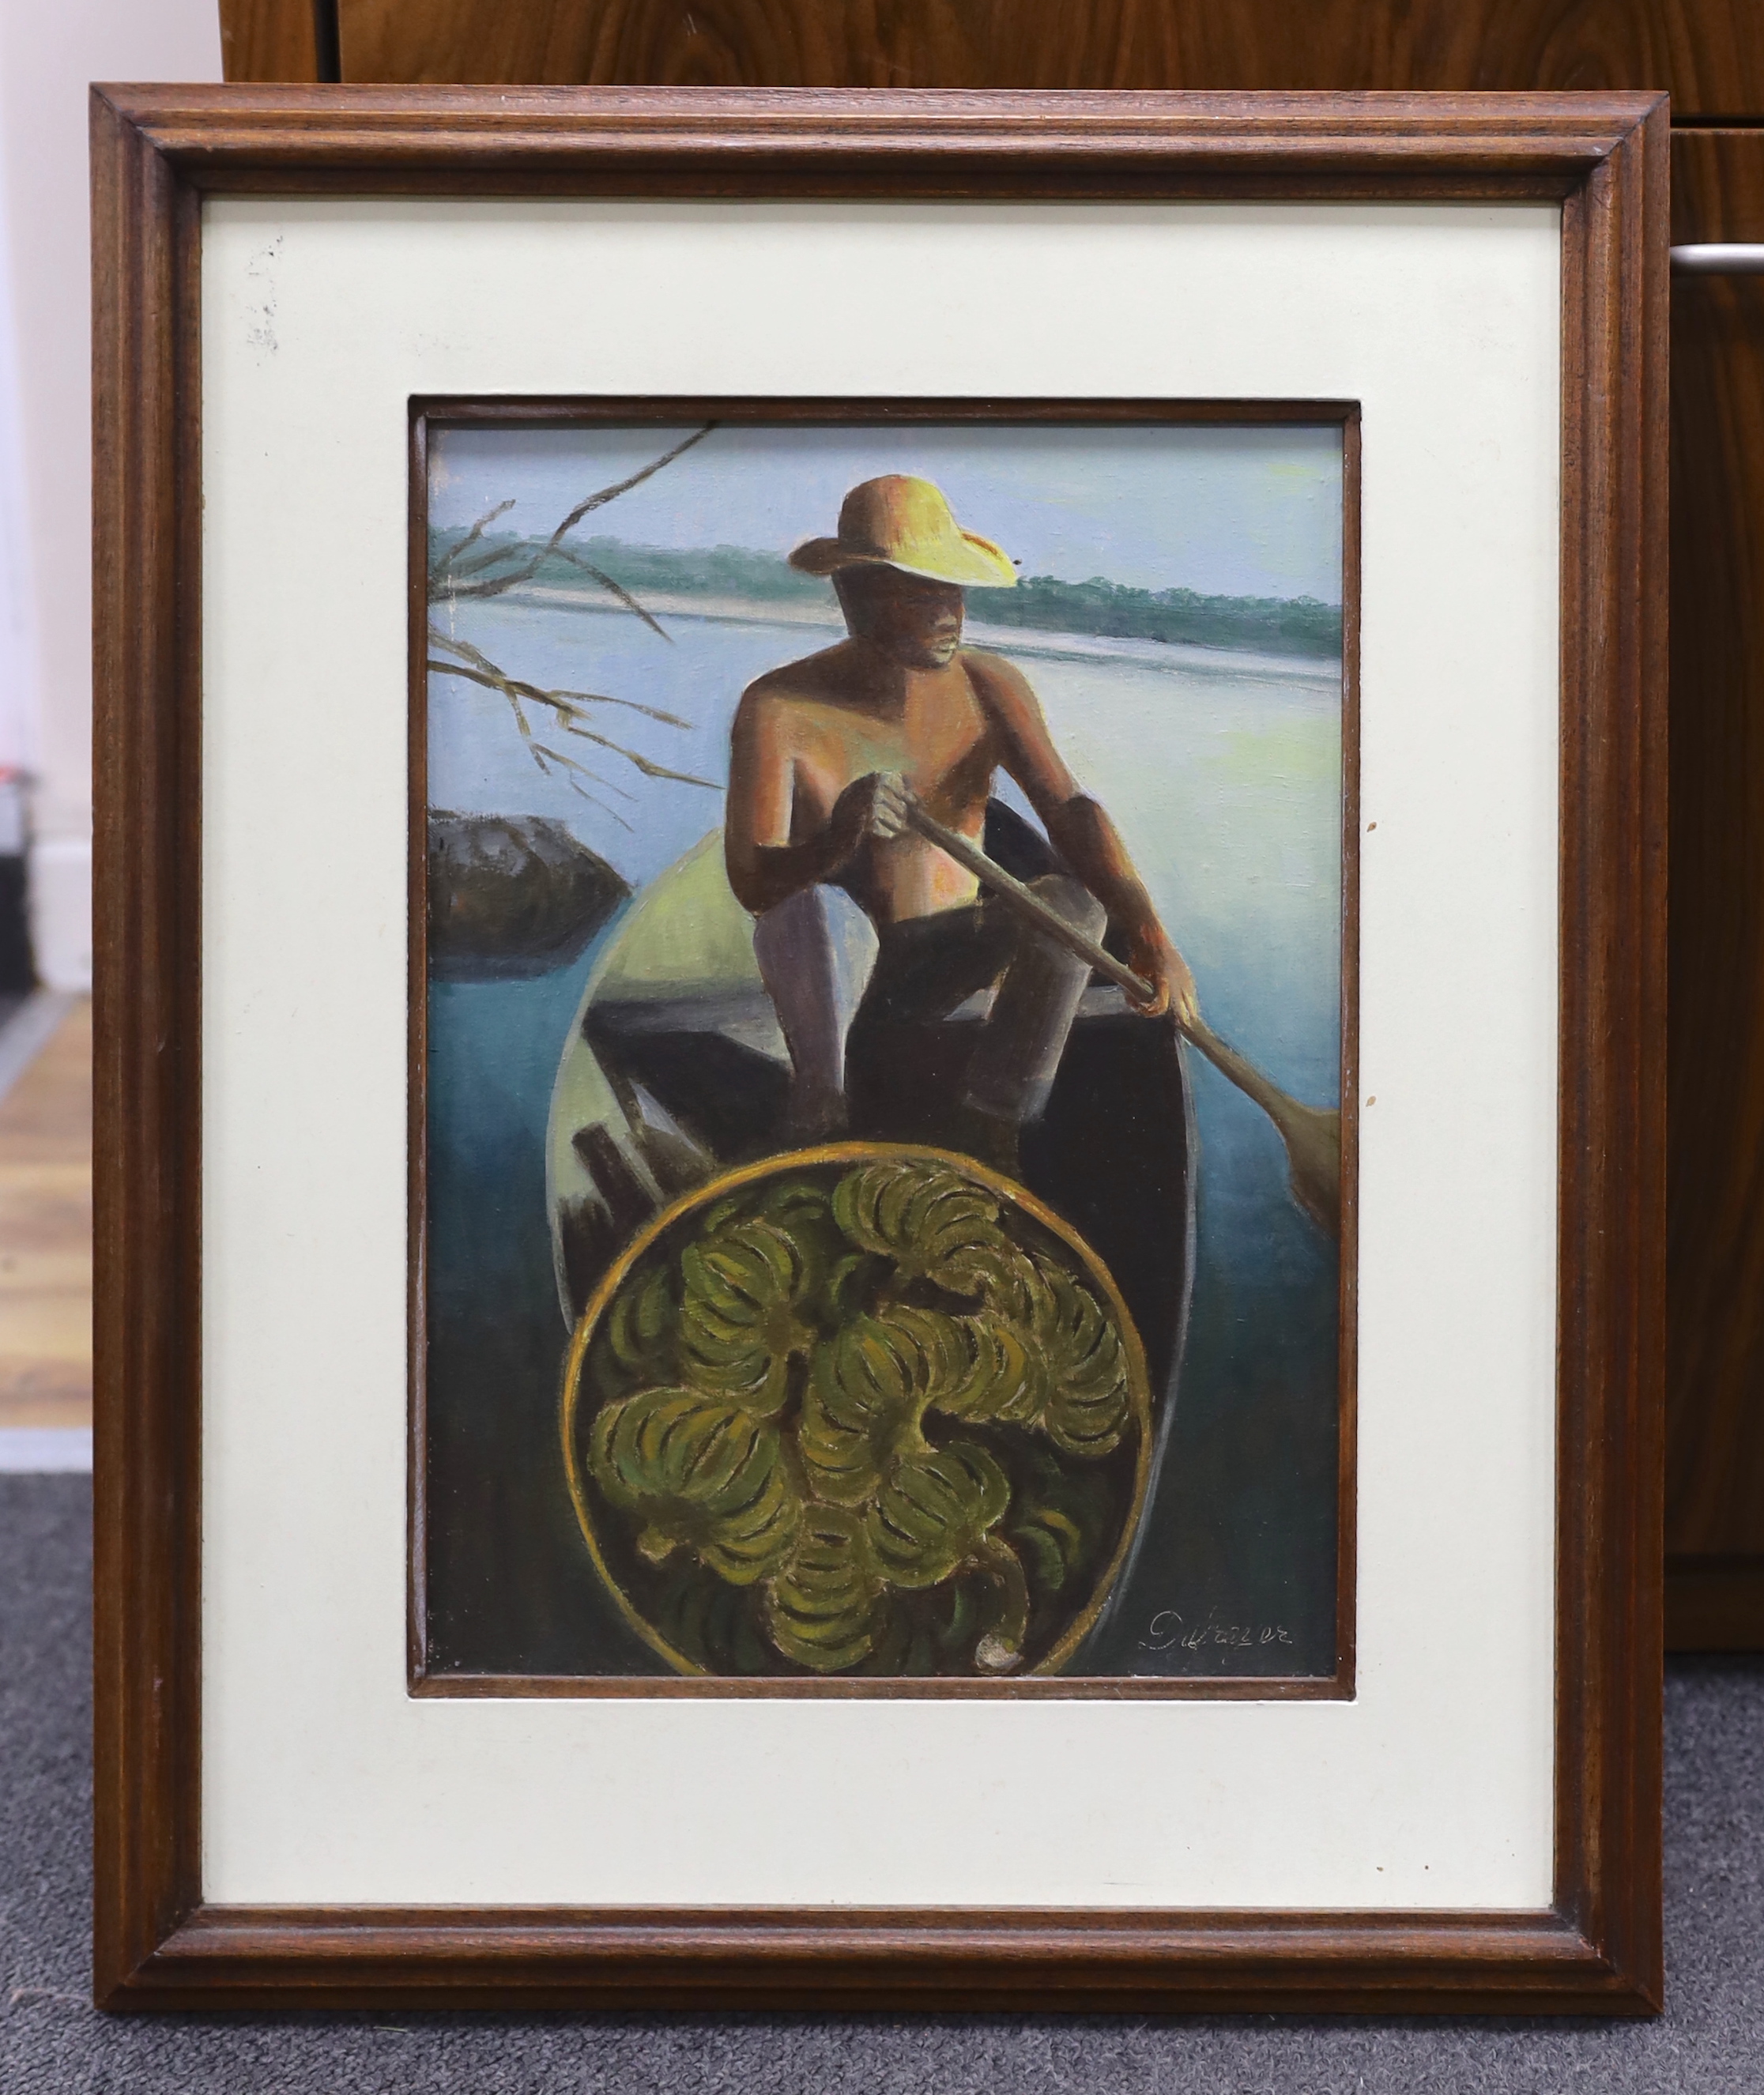 Candeiro (Brazilian), oil on canvas, 'Canoe', signed, inscribed verso, 32 x 23cm - Image 2 of 4